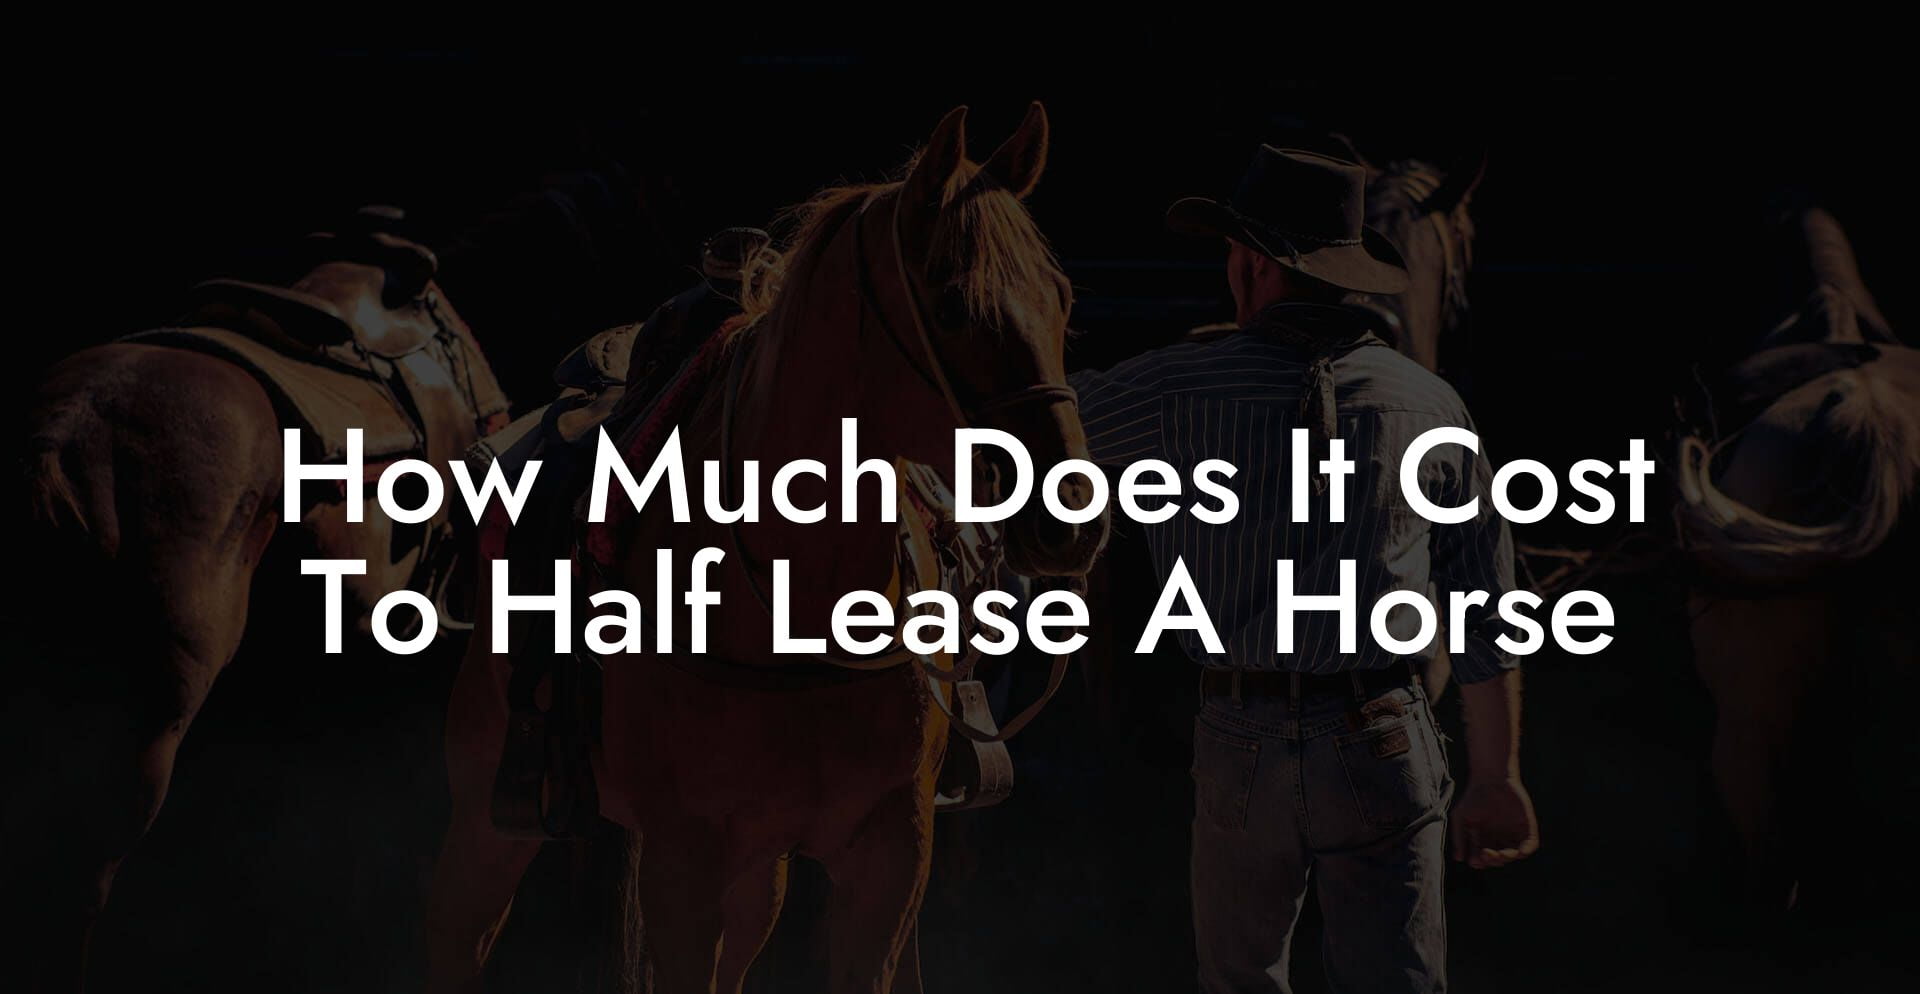 How Much Does It Cost To Half Lease A Horse